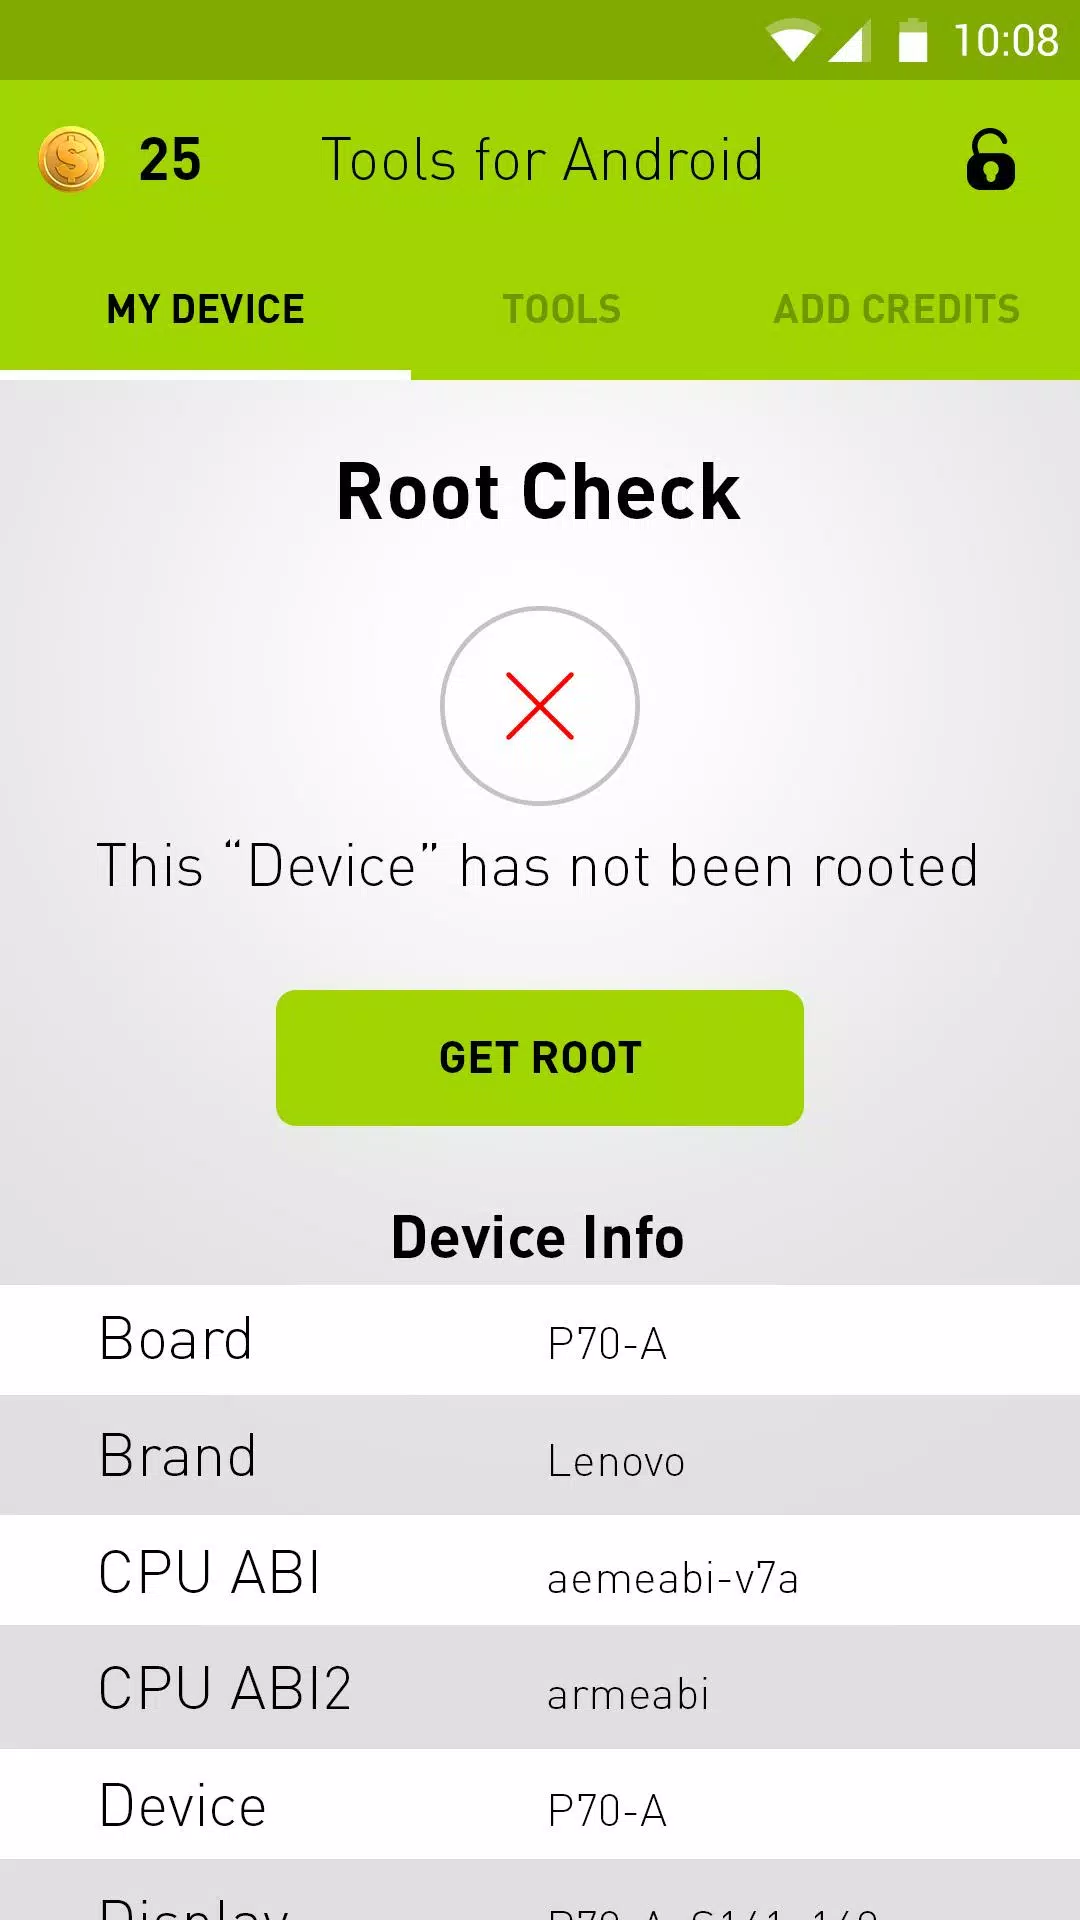 Root - Tools for Android APK for Android Download